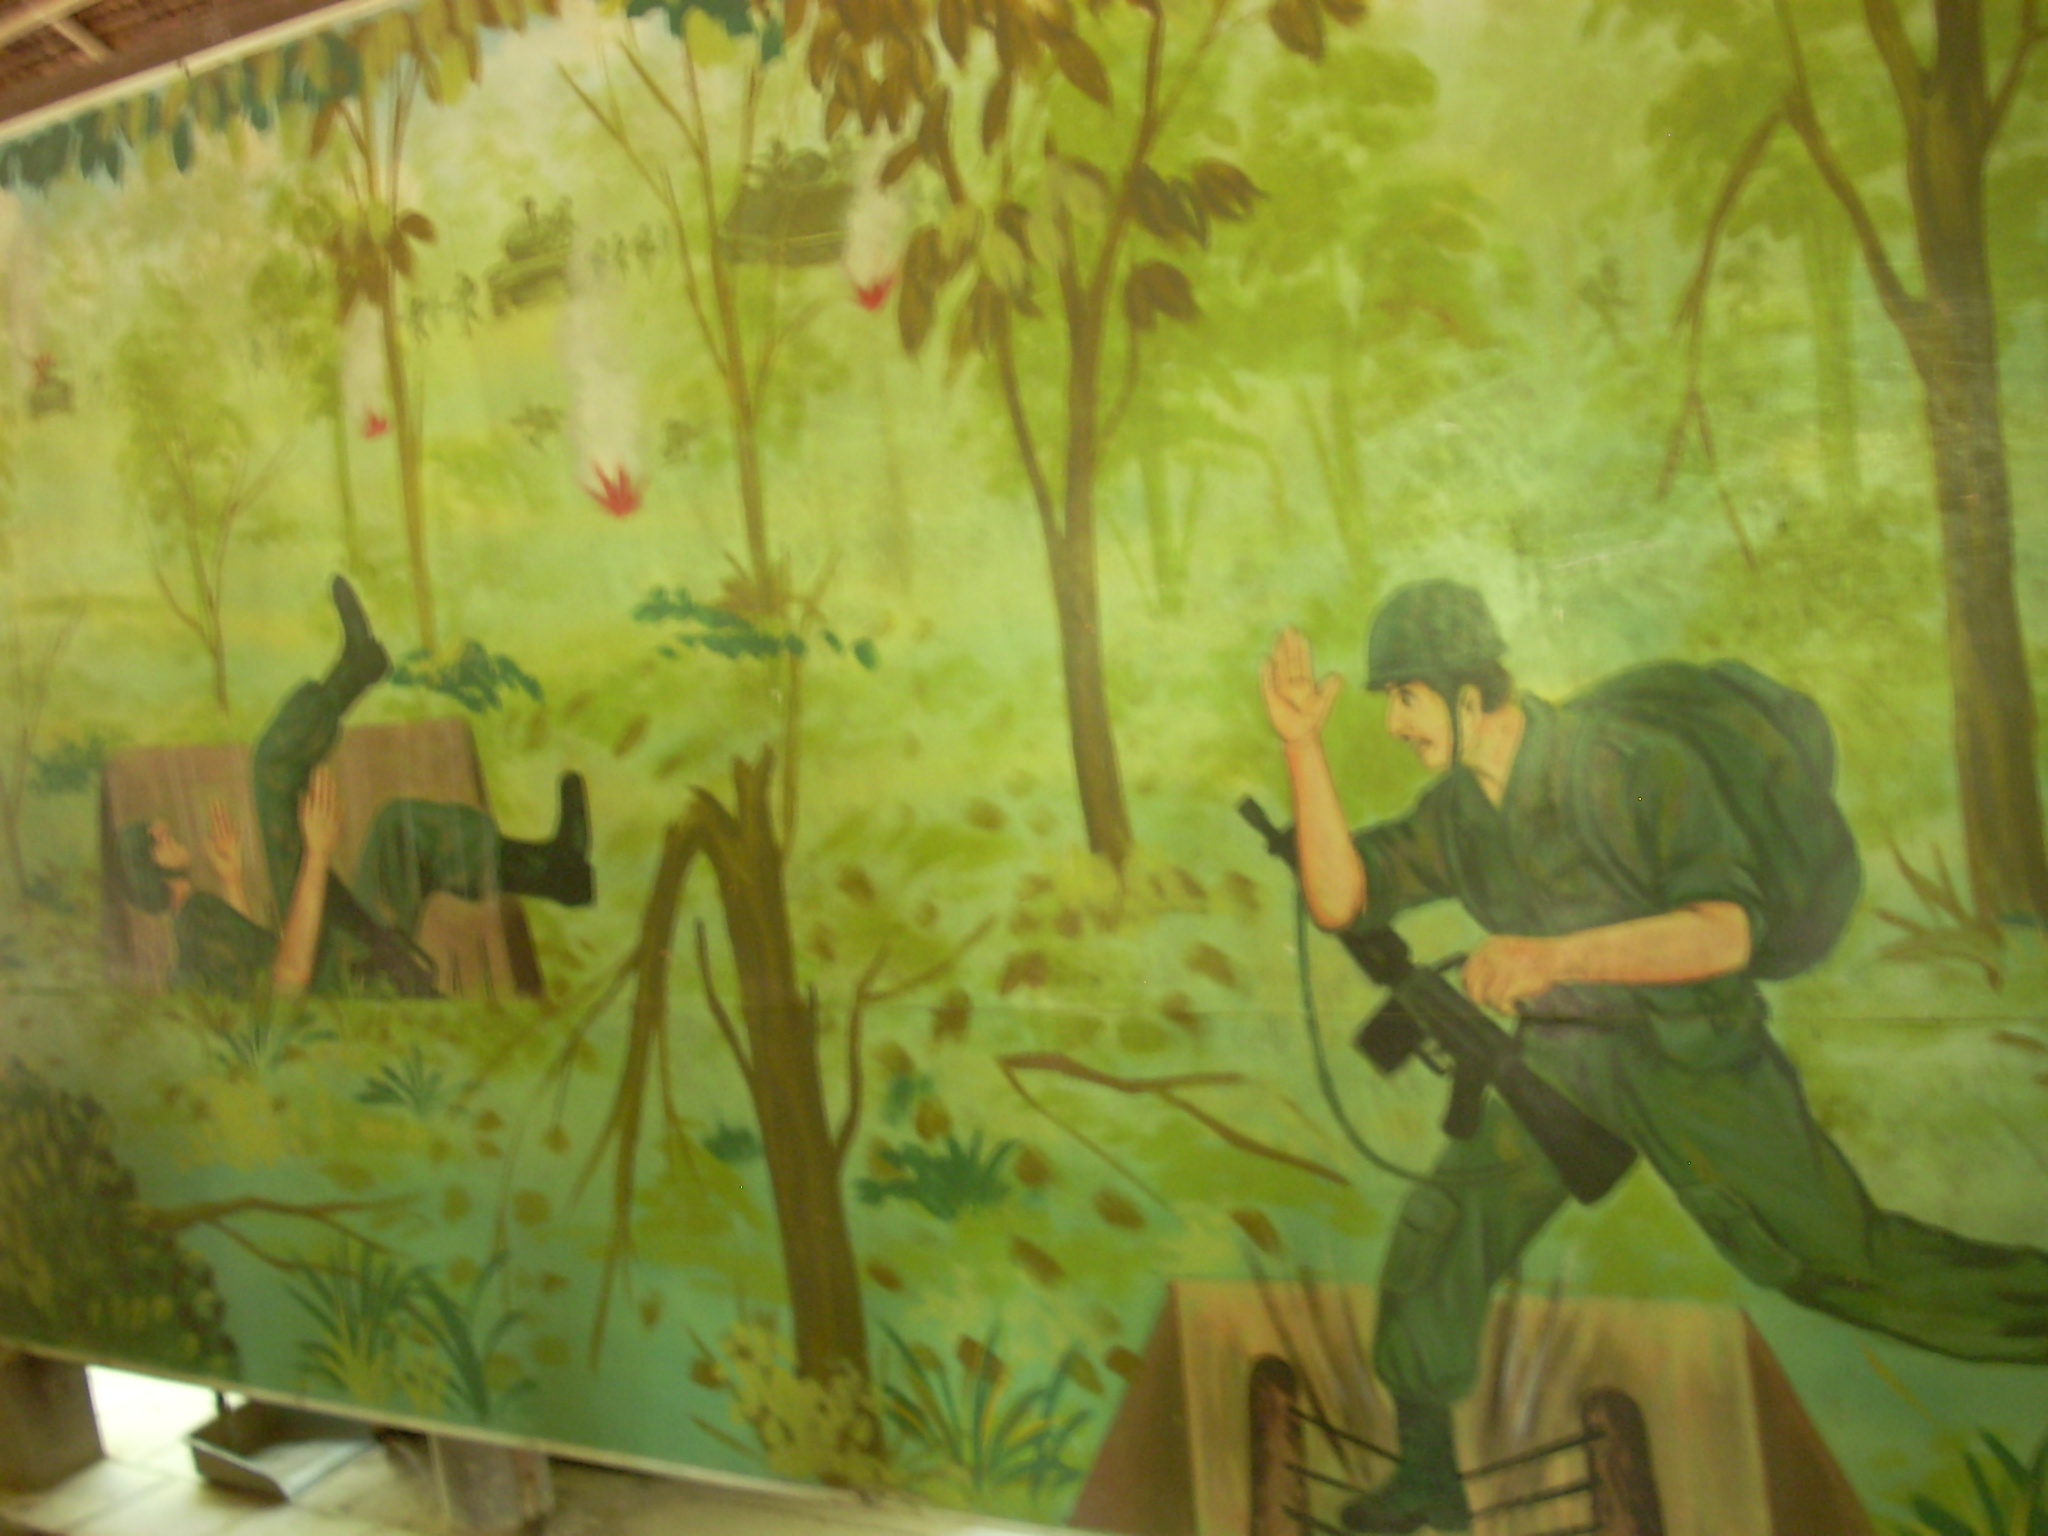 murals depicting soldiers fighting over military supplies